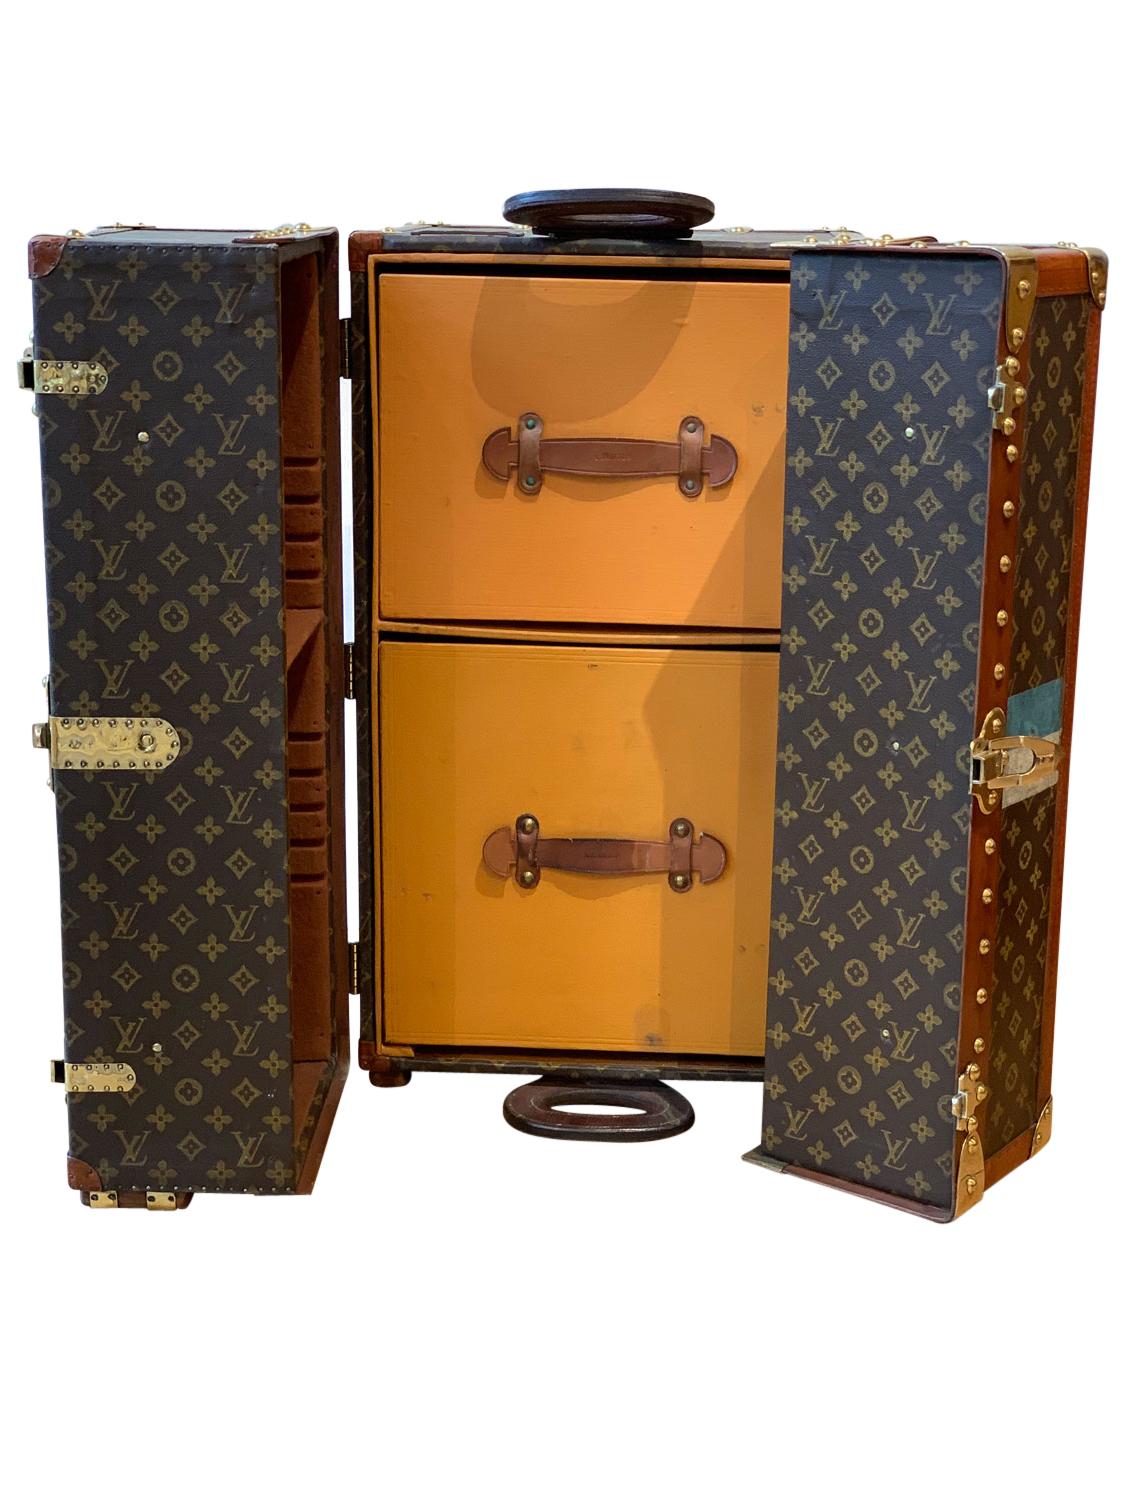 A Louis Vuitton library trunk, circa 1920 in monogrammed canvas with the initials S.C. and the number 8. The trunk opens on it’s end to a central compartment with two drawers for files, the left door with Louis Vuitton canvas straps is for books and